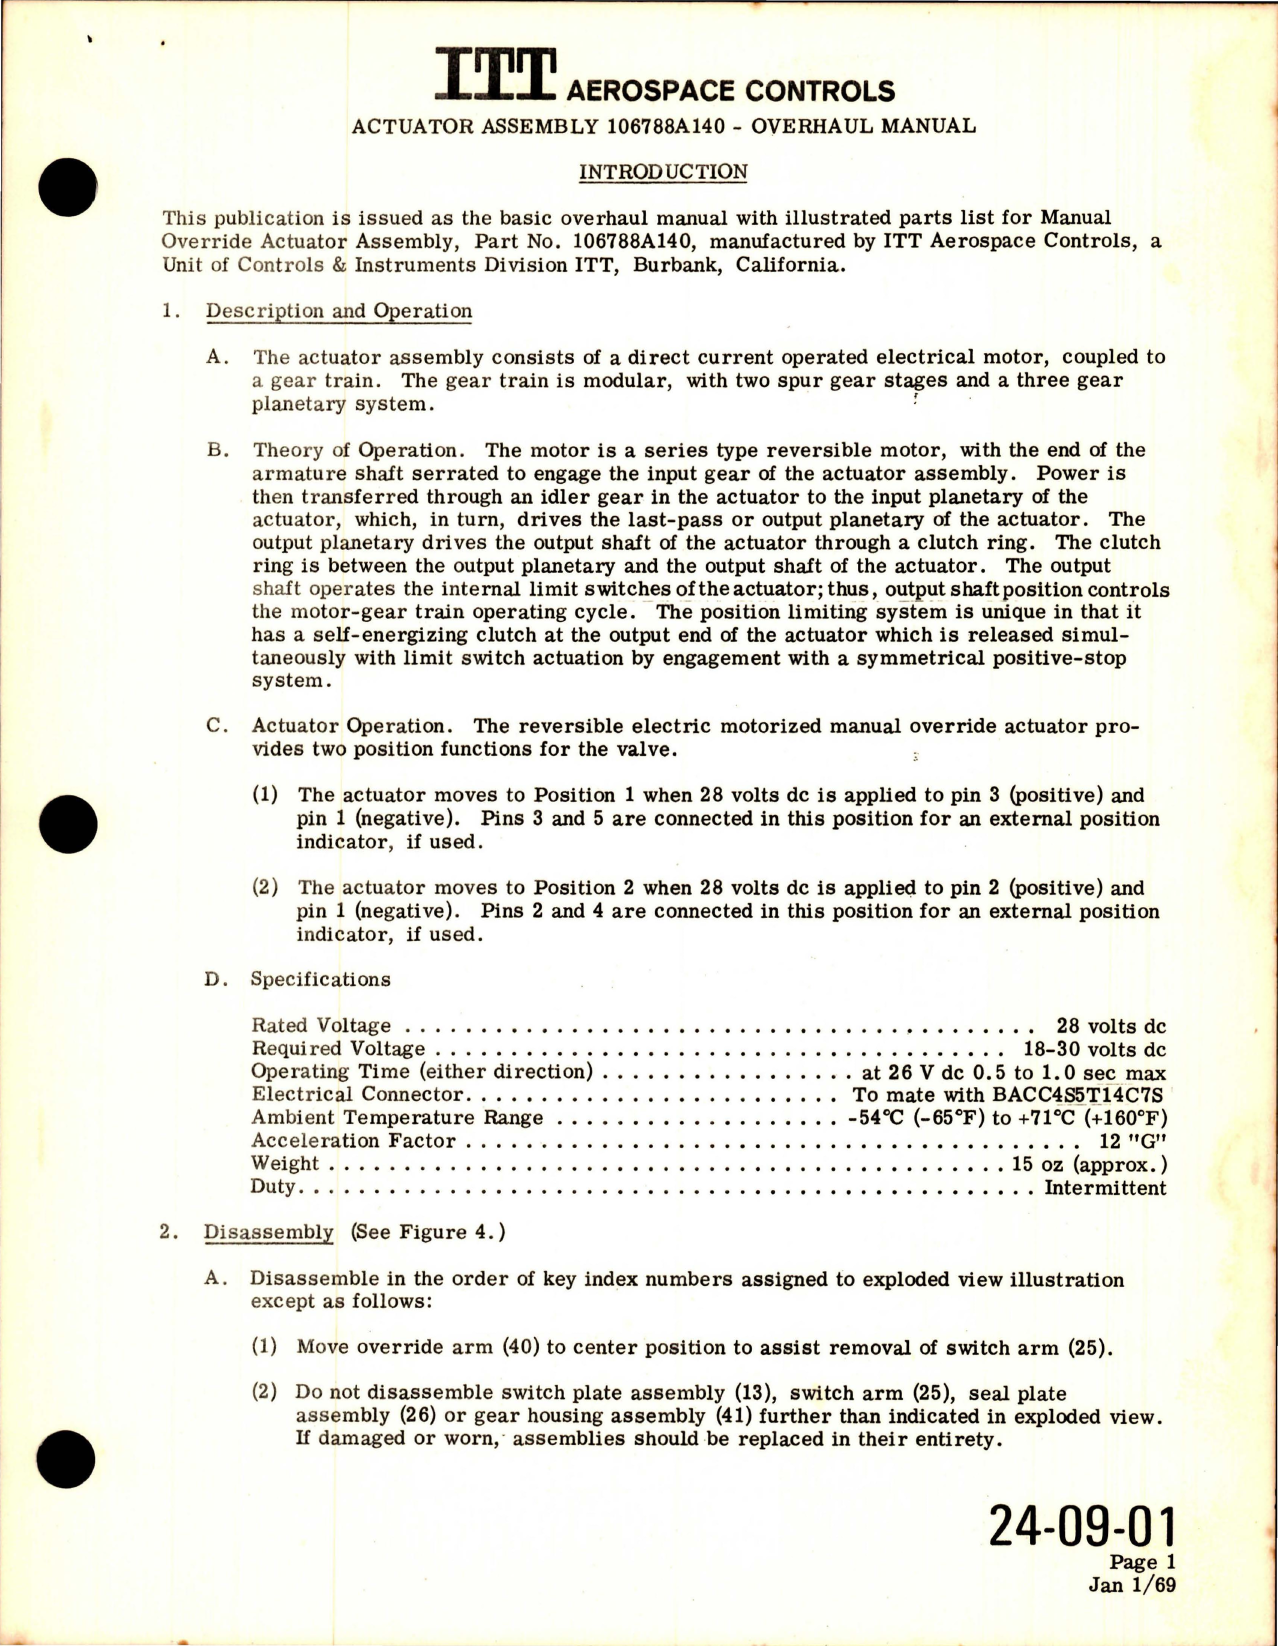 Sample page 7 from AirCorps Library document: Overhaul Instructions with Illustrated Parts List for Manual Override Actuator - Part 106788A140